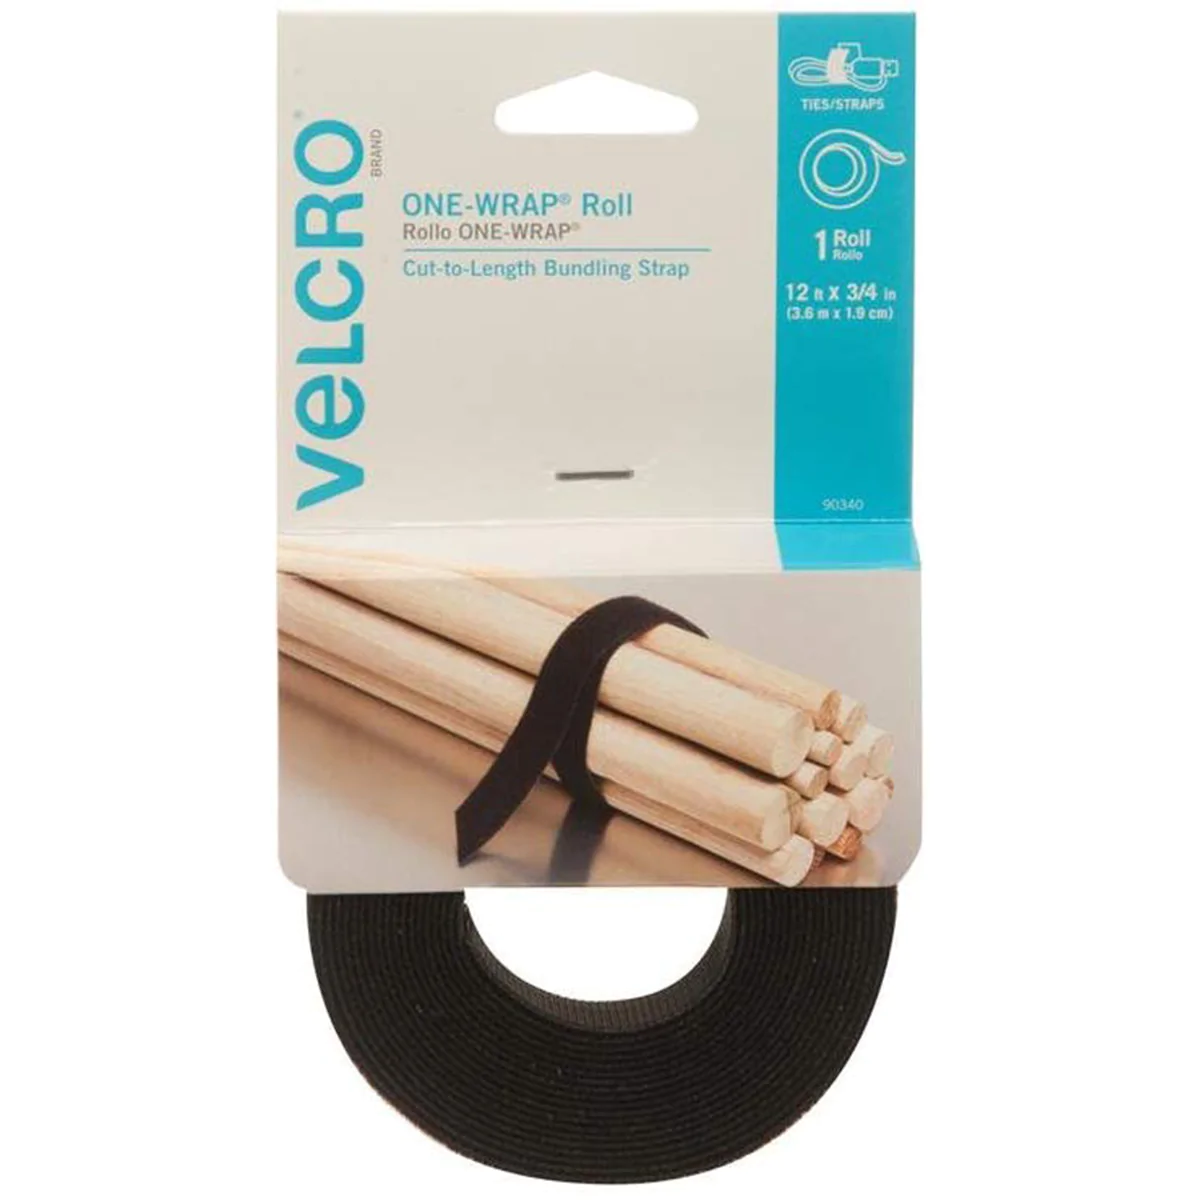 BRAND One-Wrap® Roll 12ft x 3/4in